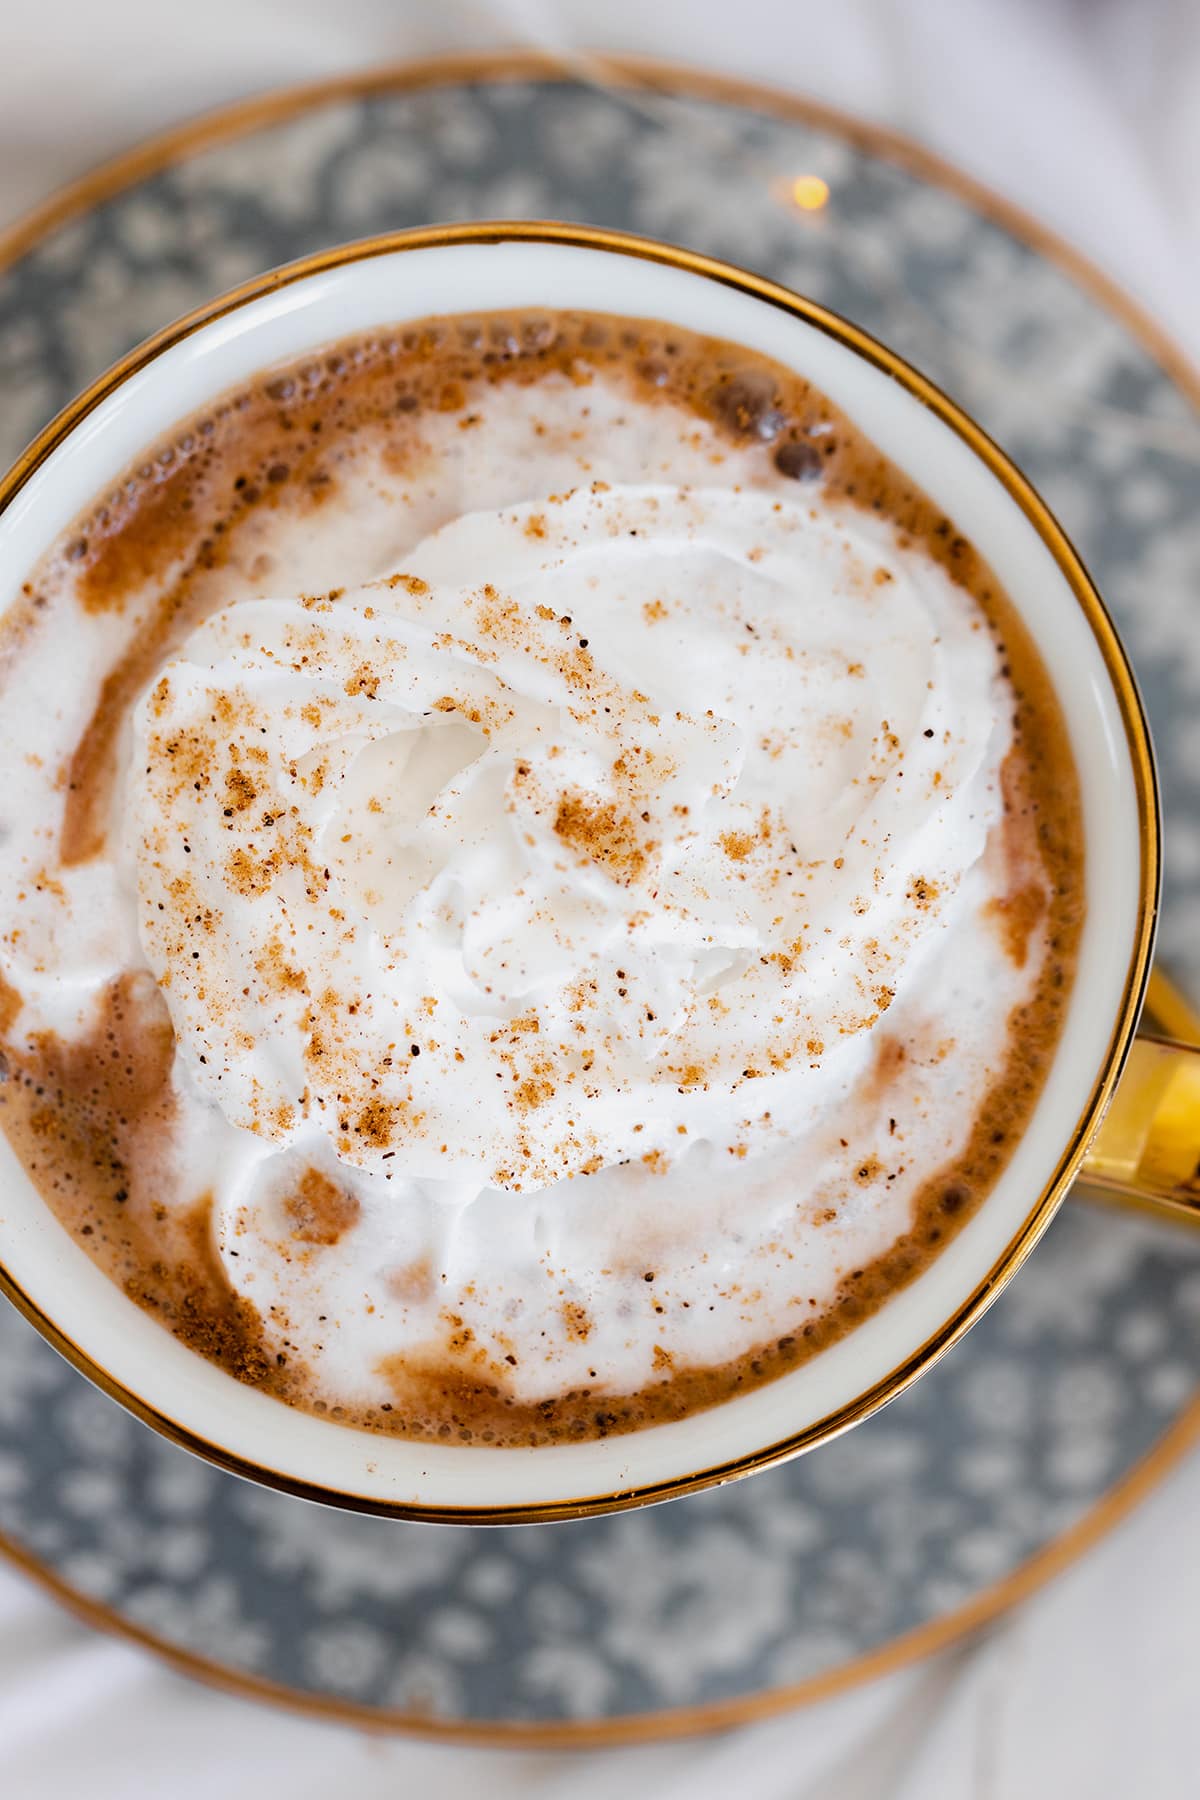 Vegan Eggnog Mocha with whipped cream and a sprinkle of nutmeg in a white mug on white bedsheets.